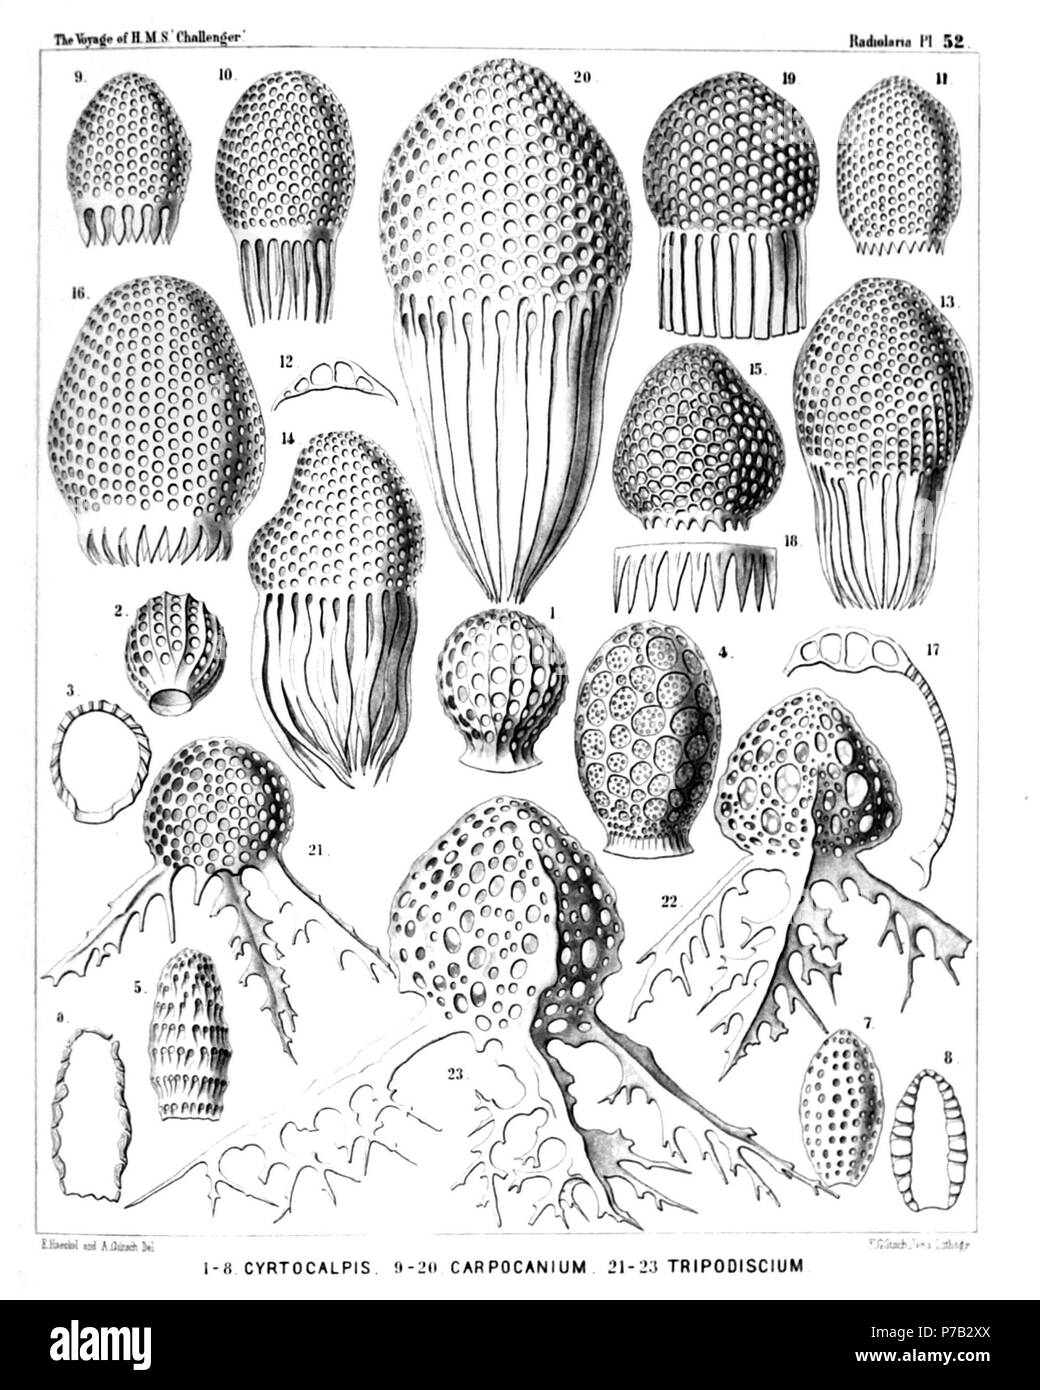 English: Illustration from Report on the Radiolaria collected by H.M.S. Challenger during the years 1873-1876. Part III. Original description follows:  Plate 52. Tripocalpida, Phænocalpida, Cyrtocalpida et Anthocyrtida.  Diam.  Fig. 1. Cyrtophormis pila, n. sp., × 300  Fig. 2. Cyrtophormis ærostatica, n. sp., × 300  Fig. 3. Cyrtophormis ærostatica, n. sp., × 300  Longitudinal section.  Fig. 4. Cyrtocalpis sethopora, n. sp., × 600  Fig. 5. Cyrtocalpis lithomitra, n. sp., × 400  Fig. 6. Cyrtocalpis lithomitra, n. sp., × 400  Longitudinal section.  Fig. 7. Cyrtocalpis compacta, n. sp., × 400  Fig Stock Photo